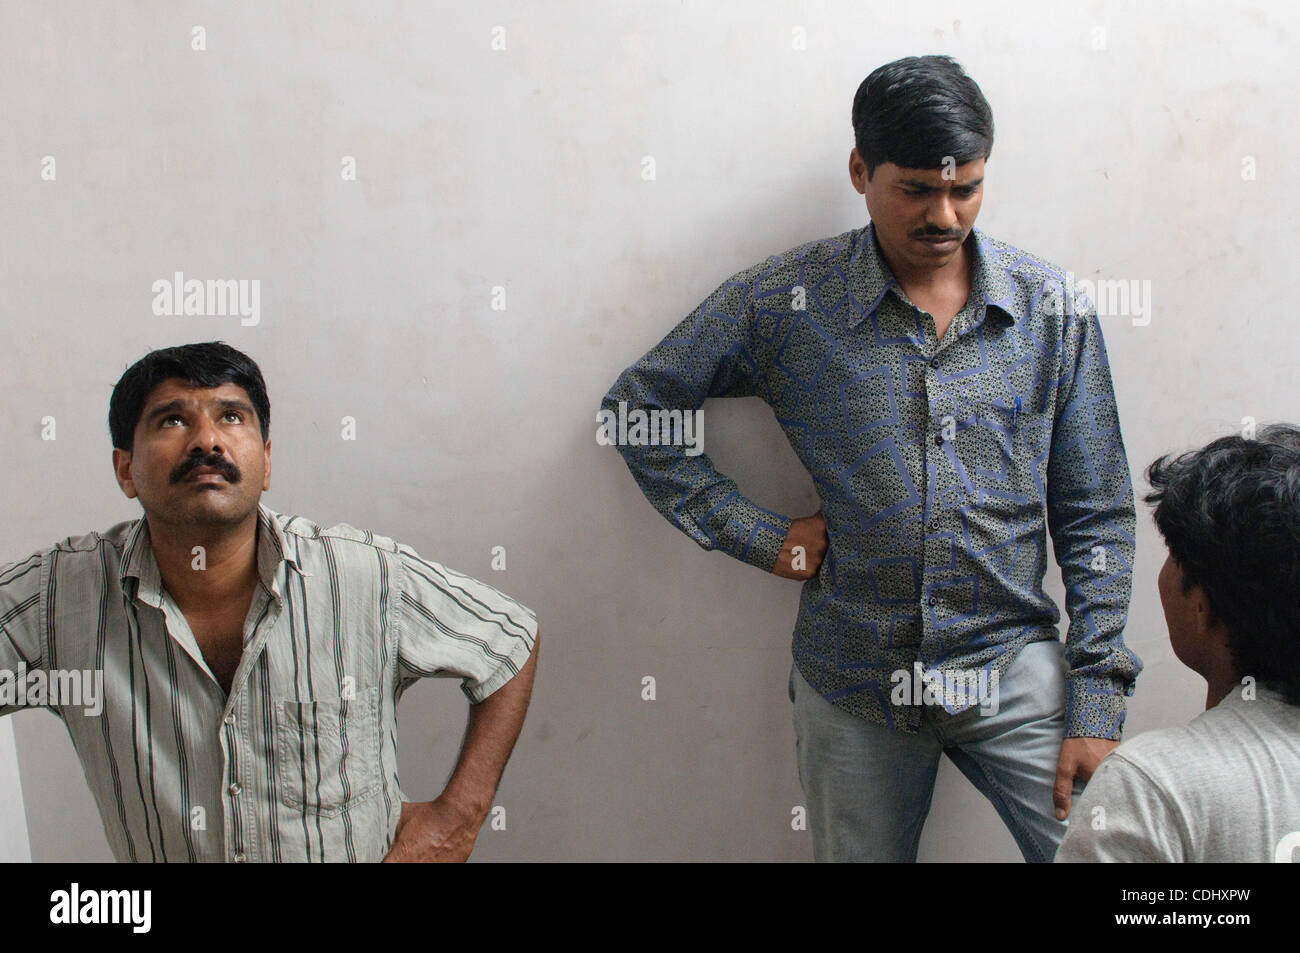 Workers wait in between takes at a music video set in Mumbai, Inida. Stock Photo